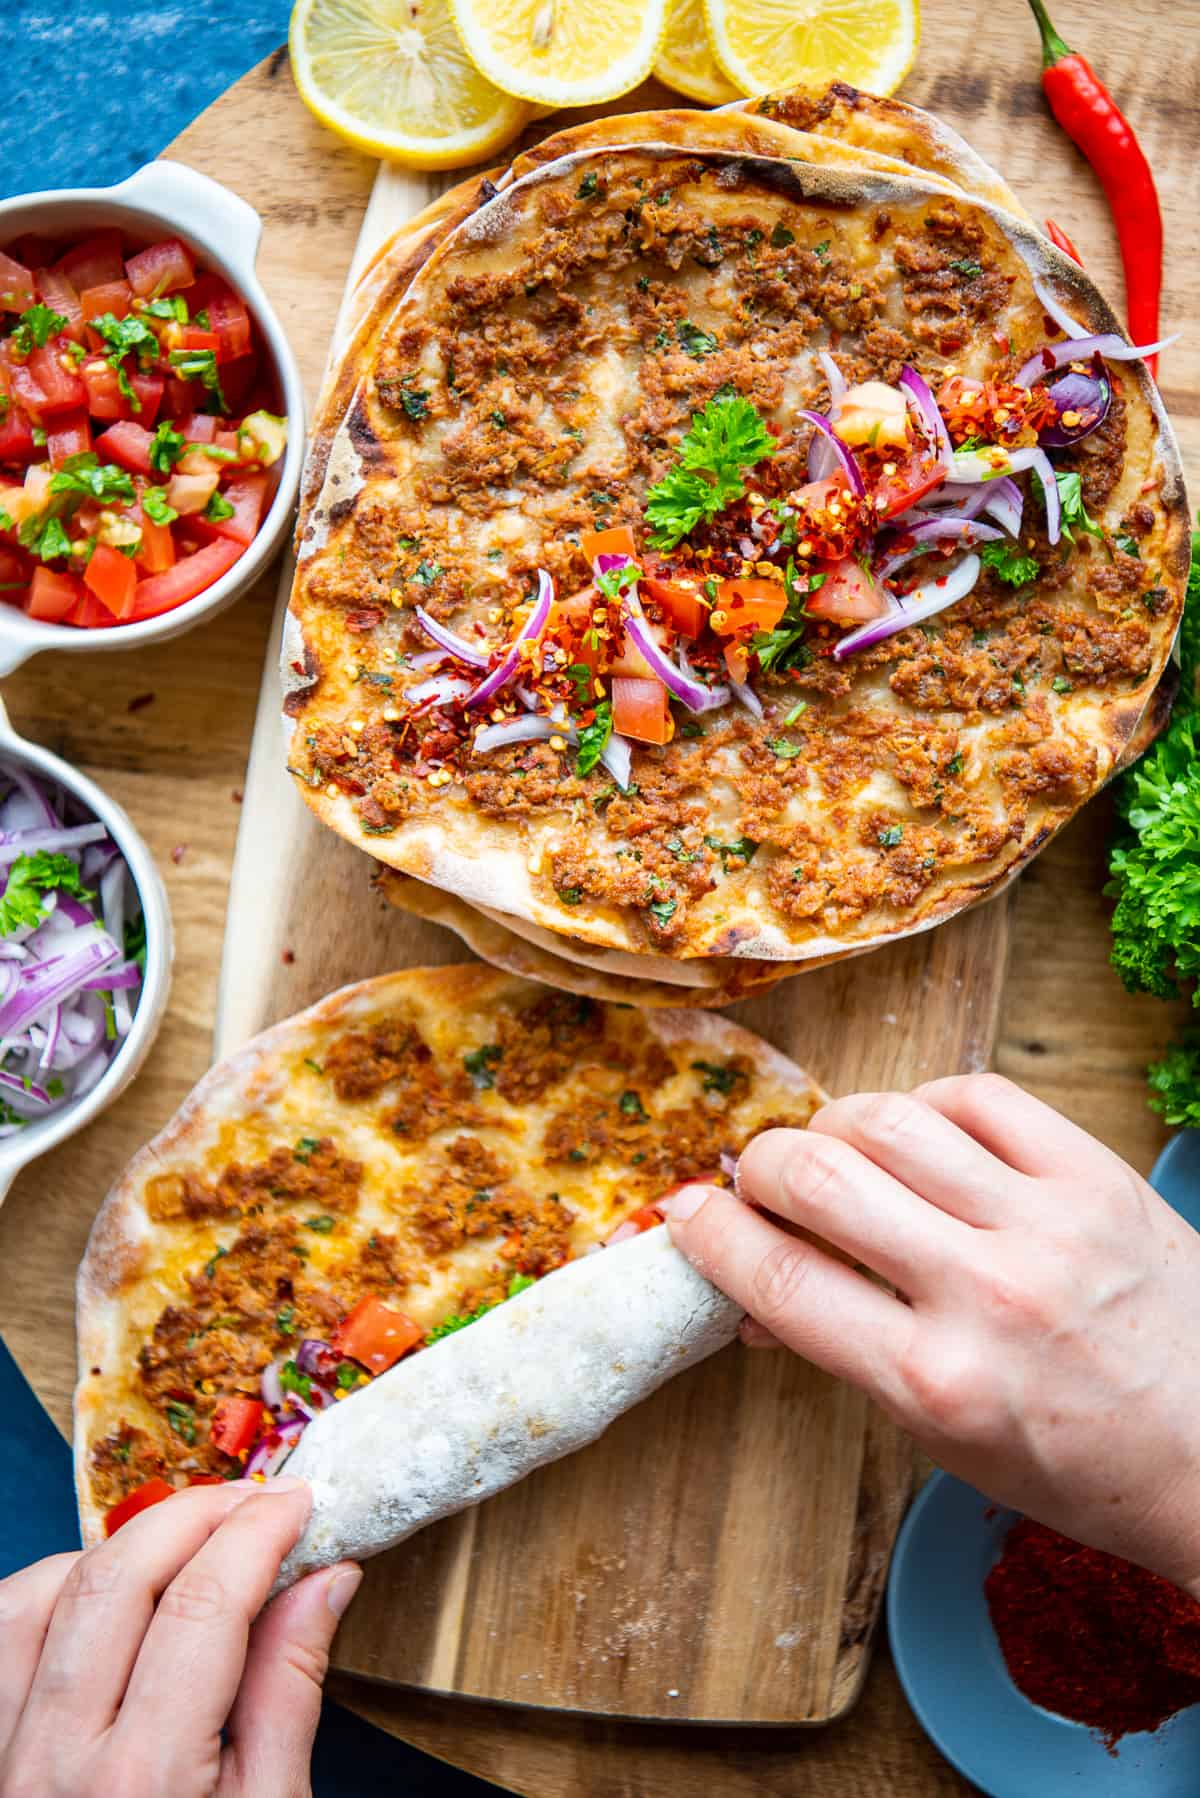 Hands making lahmacun wrap, sliced onions and tomato salad on the side.